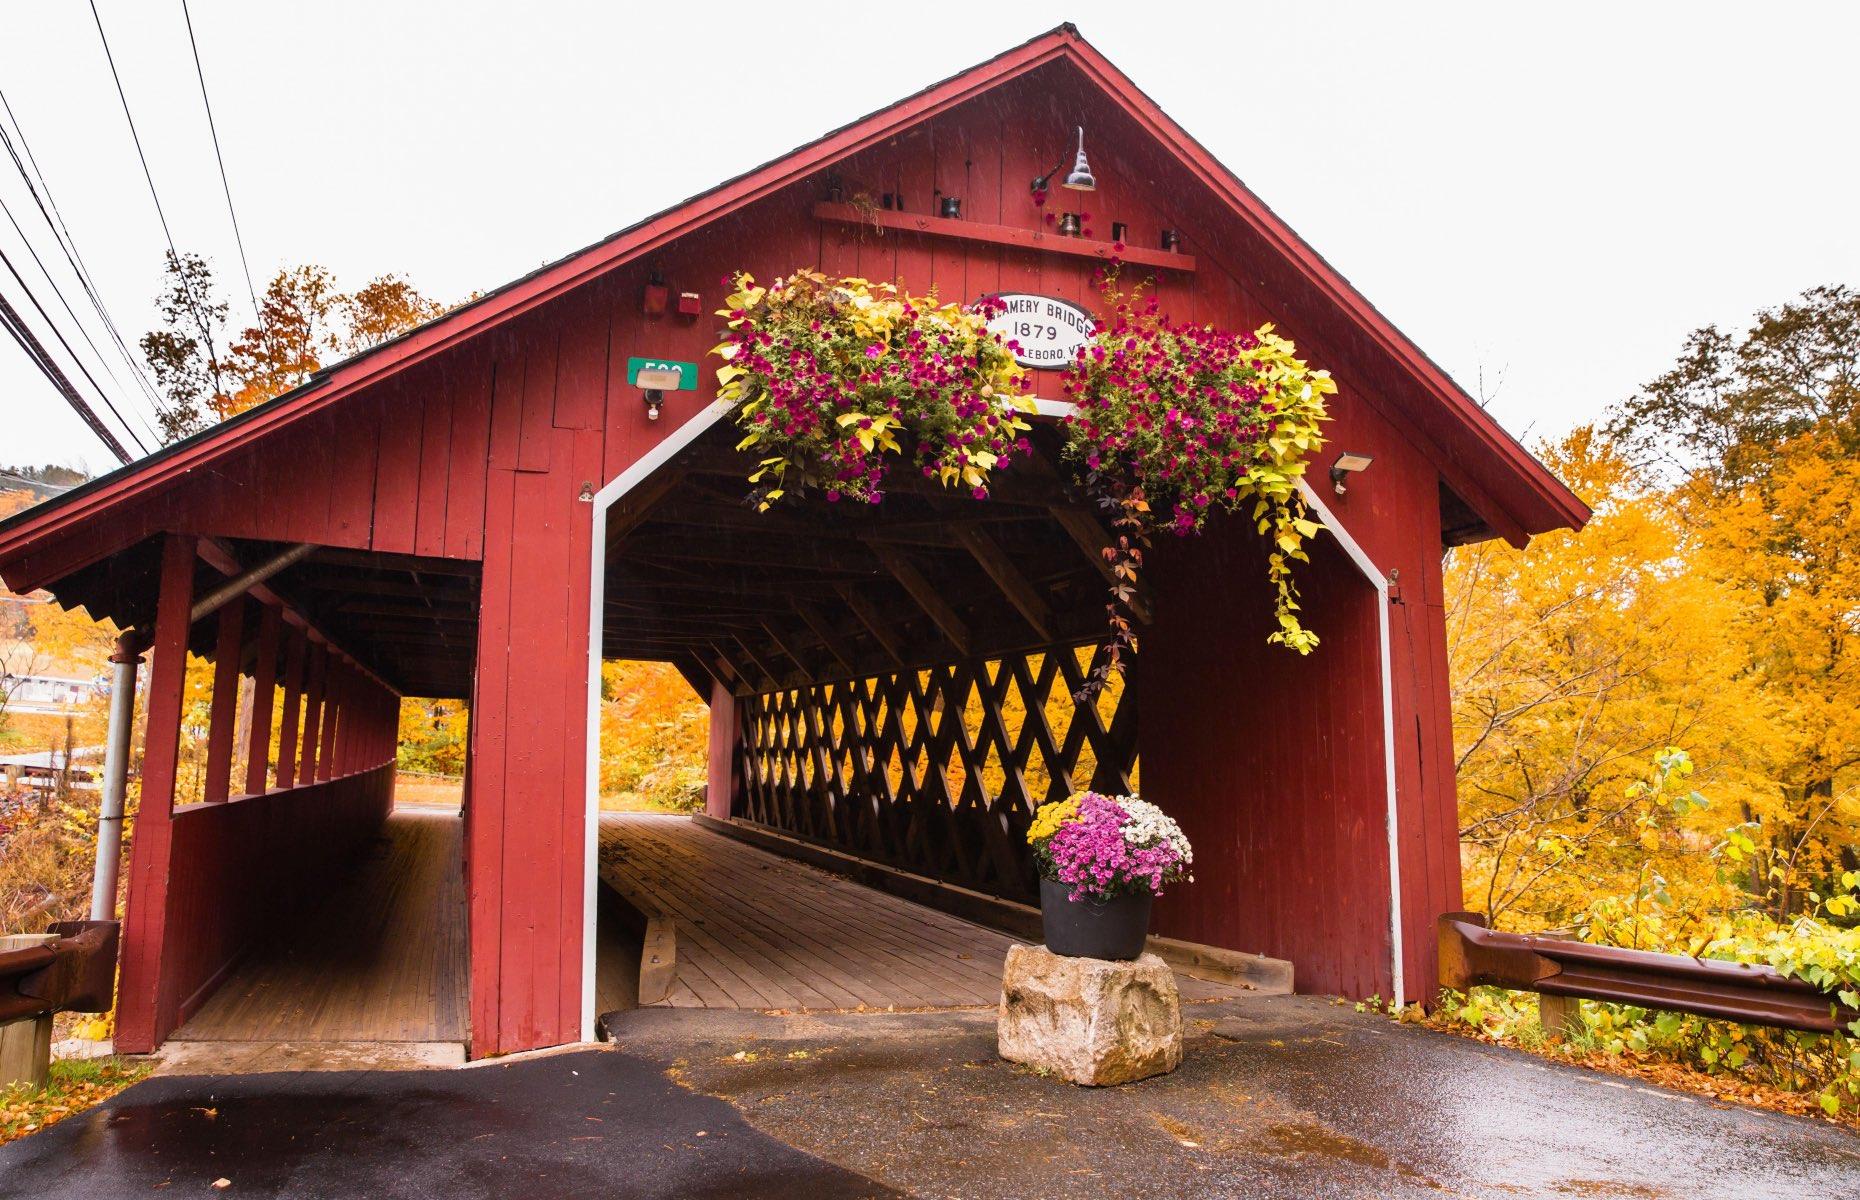 With a downtown stuffed with interesting independent stores, coffee shops and architectural gems such as the Creamery Covered Bridge (pictured), Brattleboro has more than its fair share of New England charm. Originally growing up around the Connecticut River, it was once a manufacturing center and its old converted mills still hug the riverbanks today, reinvigorated by a thriving arts community. Among the notable buildings nearby is the former lodge of famous writer Rudyard Kipling.